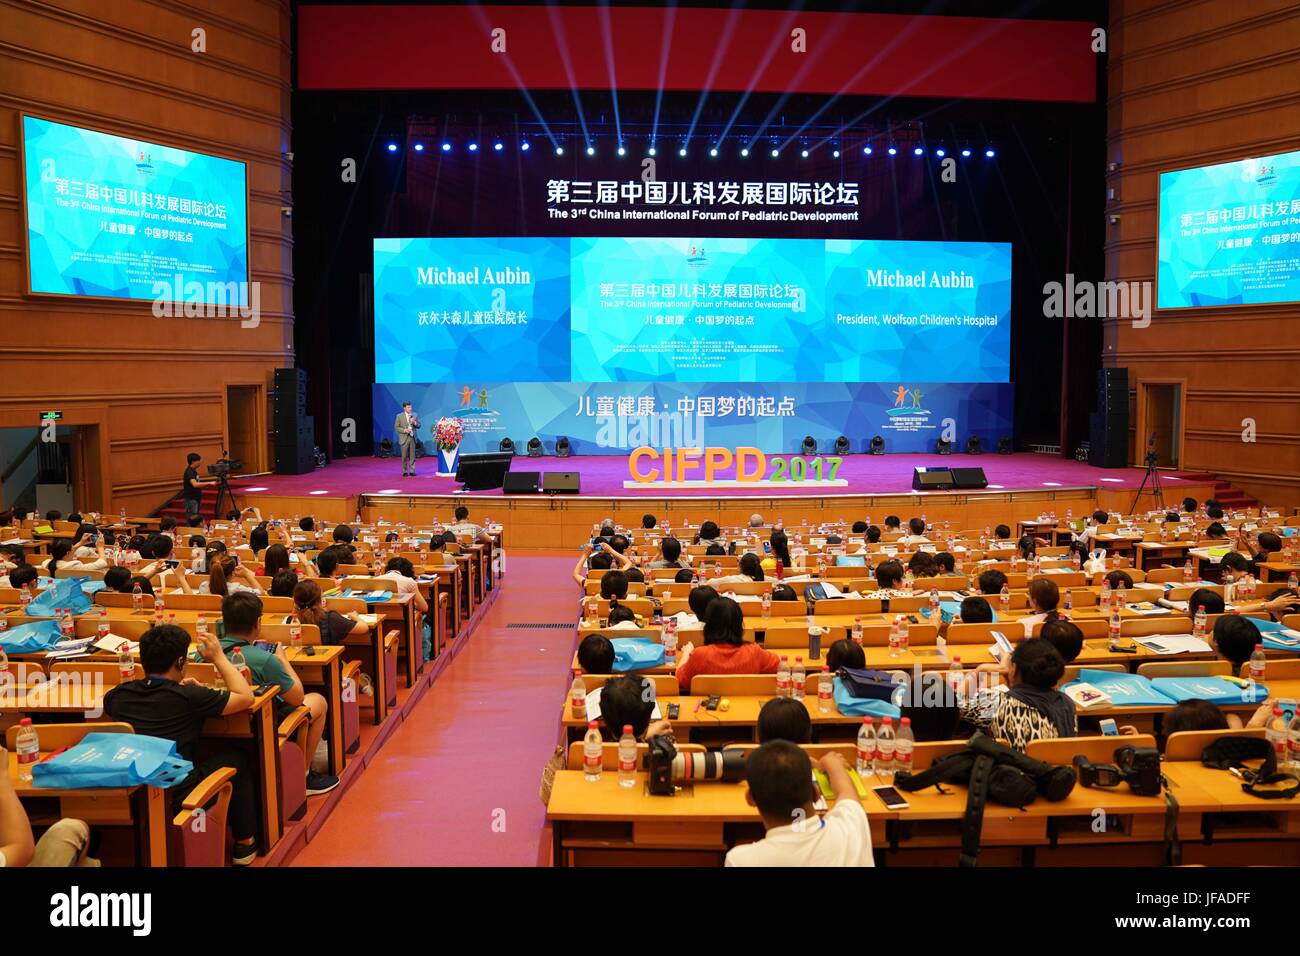 Beijing, China. 30th June, 2017. The 3rd China International Forum of Pediatric Development (CIFPD) opens in Beijing, capital of China, June 30, 2017. The every-two-year CIFPD, under the theme 'Children's Health, the Starting Point of the Chinese Dream', is devoted to advancing international pediatric development, exchanges and collaborations. This year's CIFPD lasts from June 30 to July 2. Credit: Zhang Yuwei/Xinhua/Alamy Live News Stock Photo